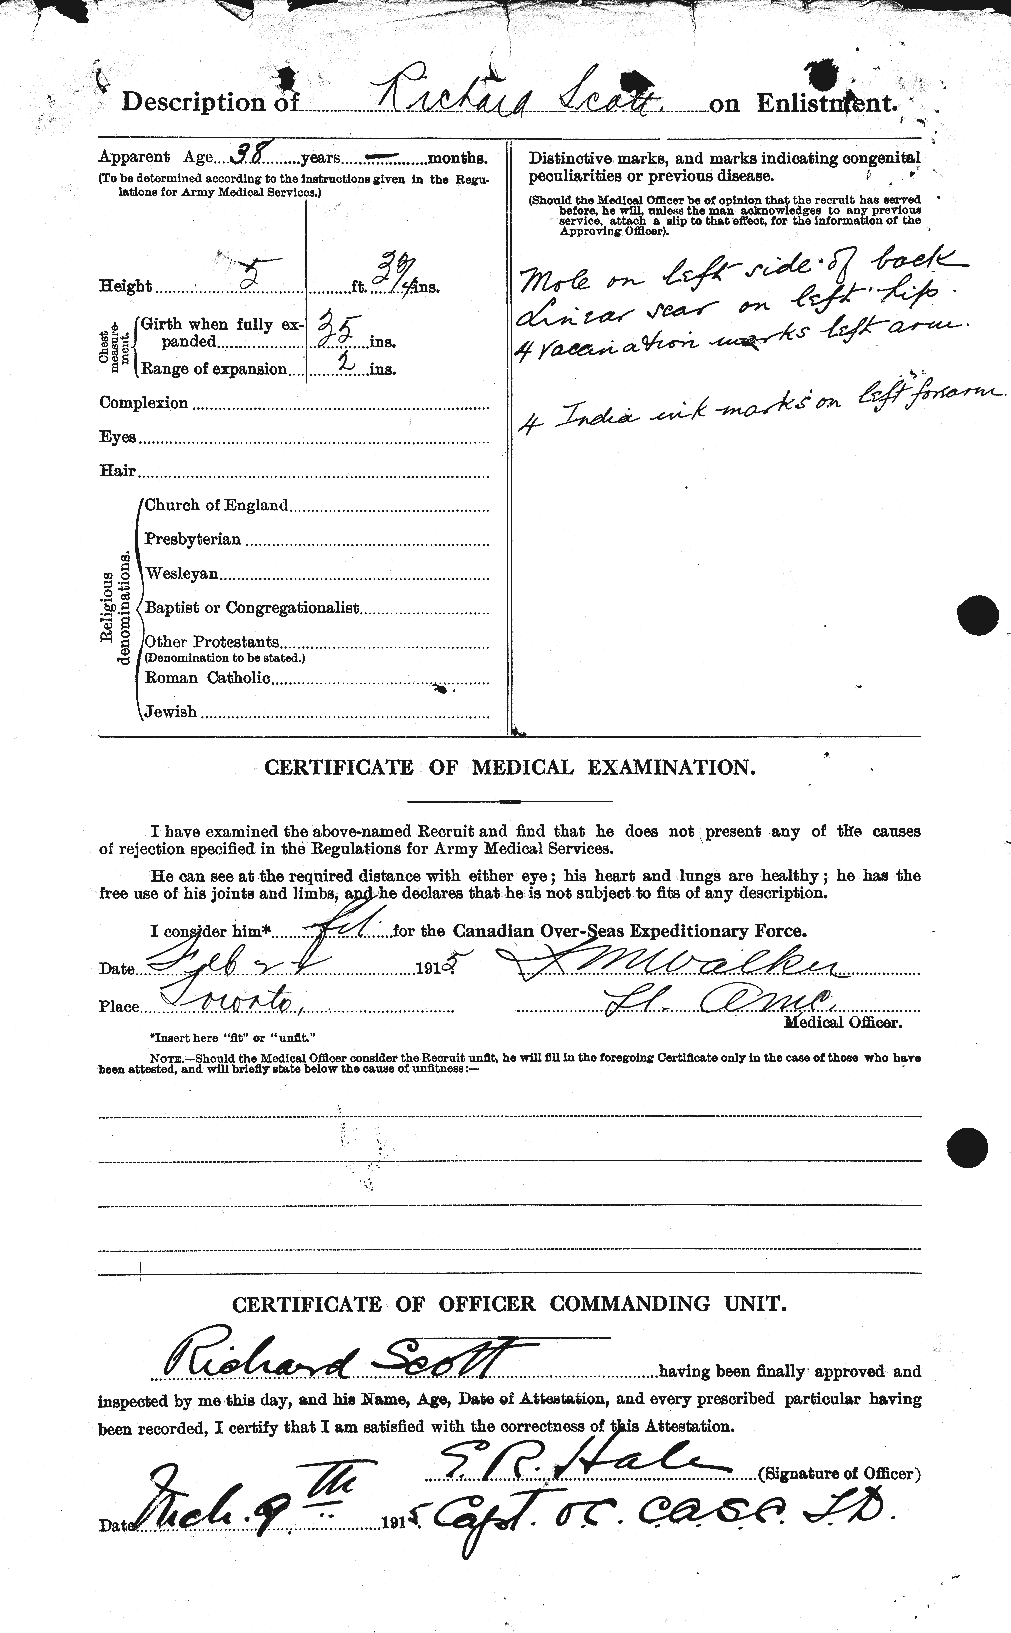 Personnel Records of the First World War - CEF 090187b